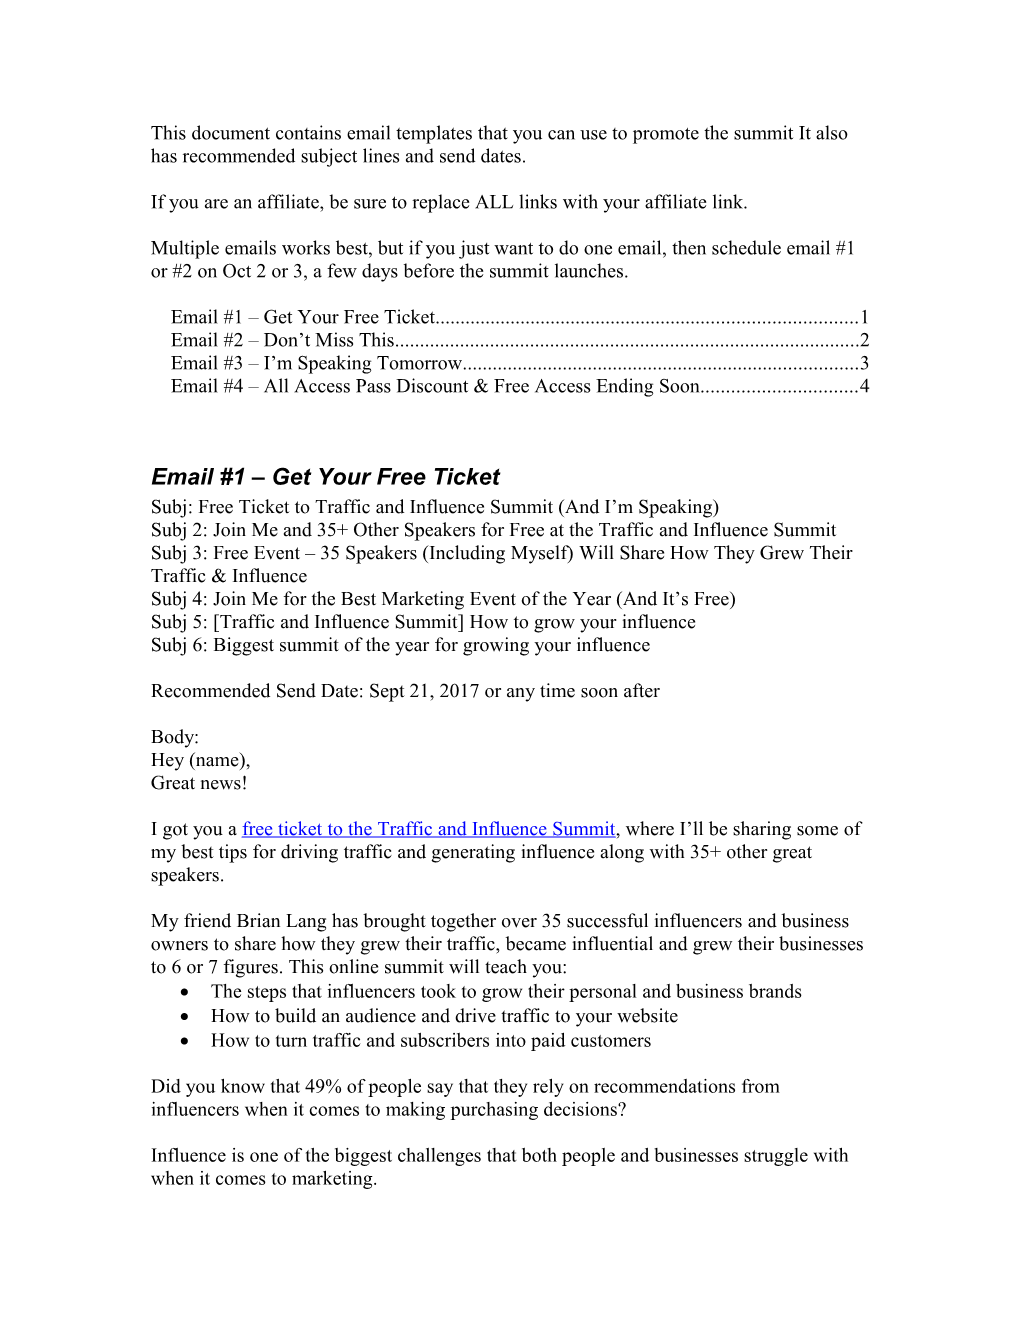 This Document Contains Email Templates That You Can Use to Promote the Summit It Also Has